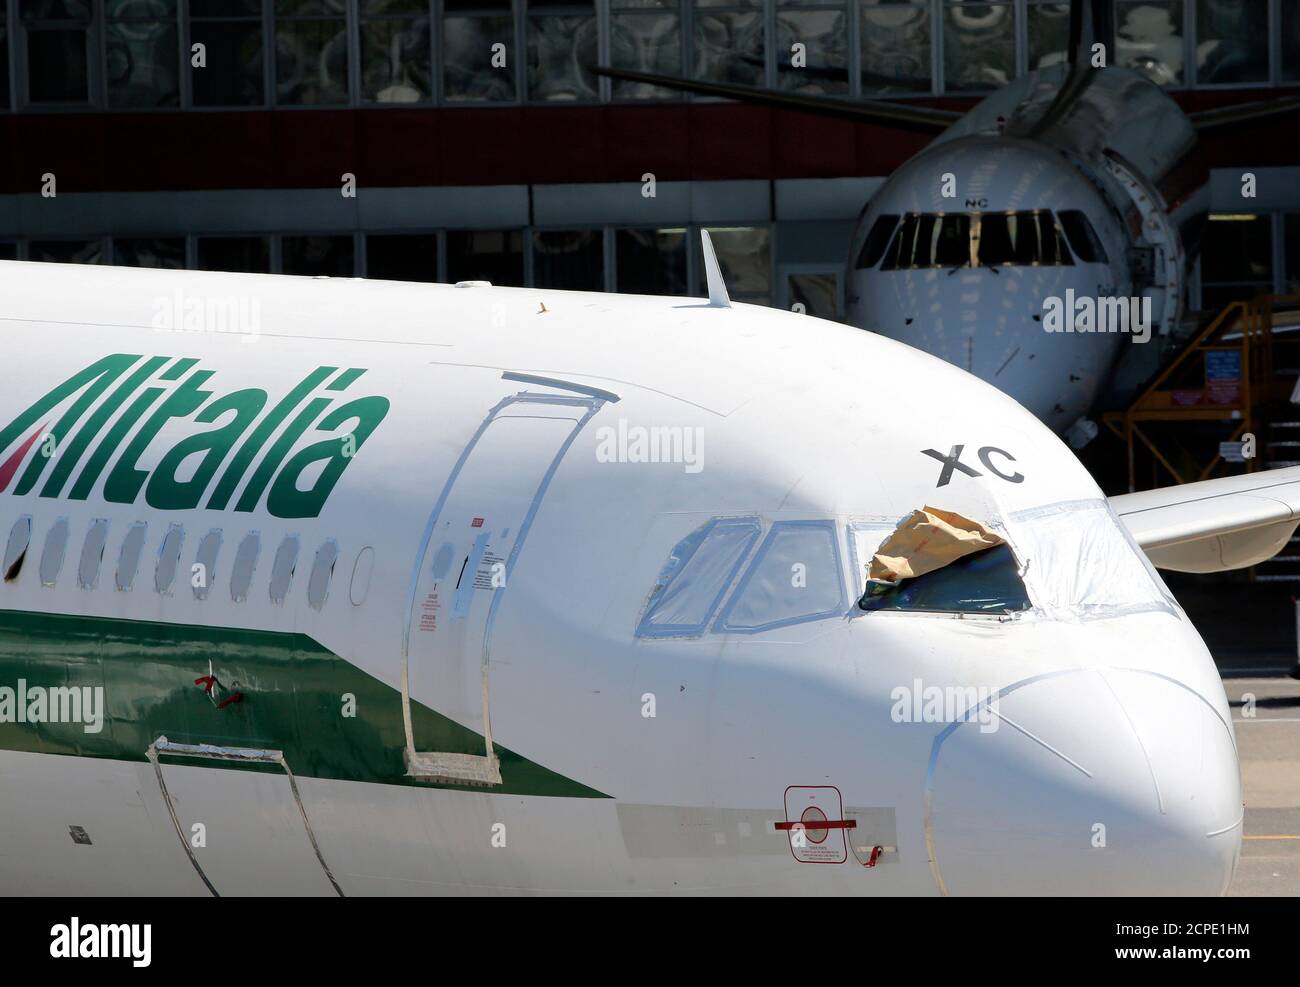 An Alitalia airplane is seen outside a hangar at Leonardo da Vinci airport  in Fiumicino, August 8, 2014. Italy's flagship carrier Alitalia said on  Friday it had reached a deal with trade